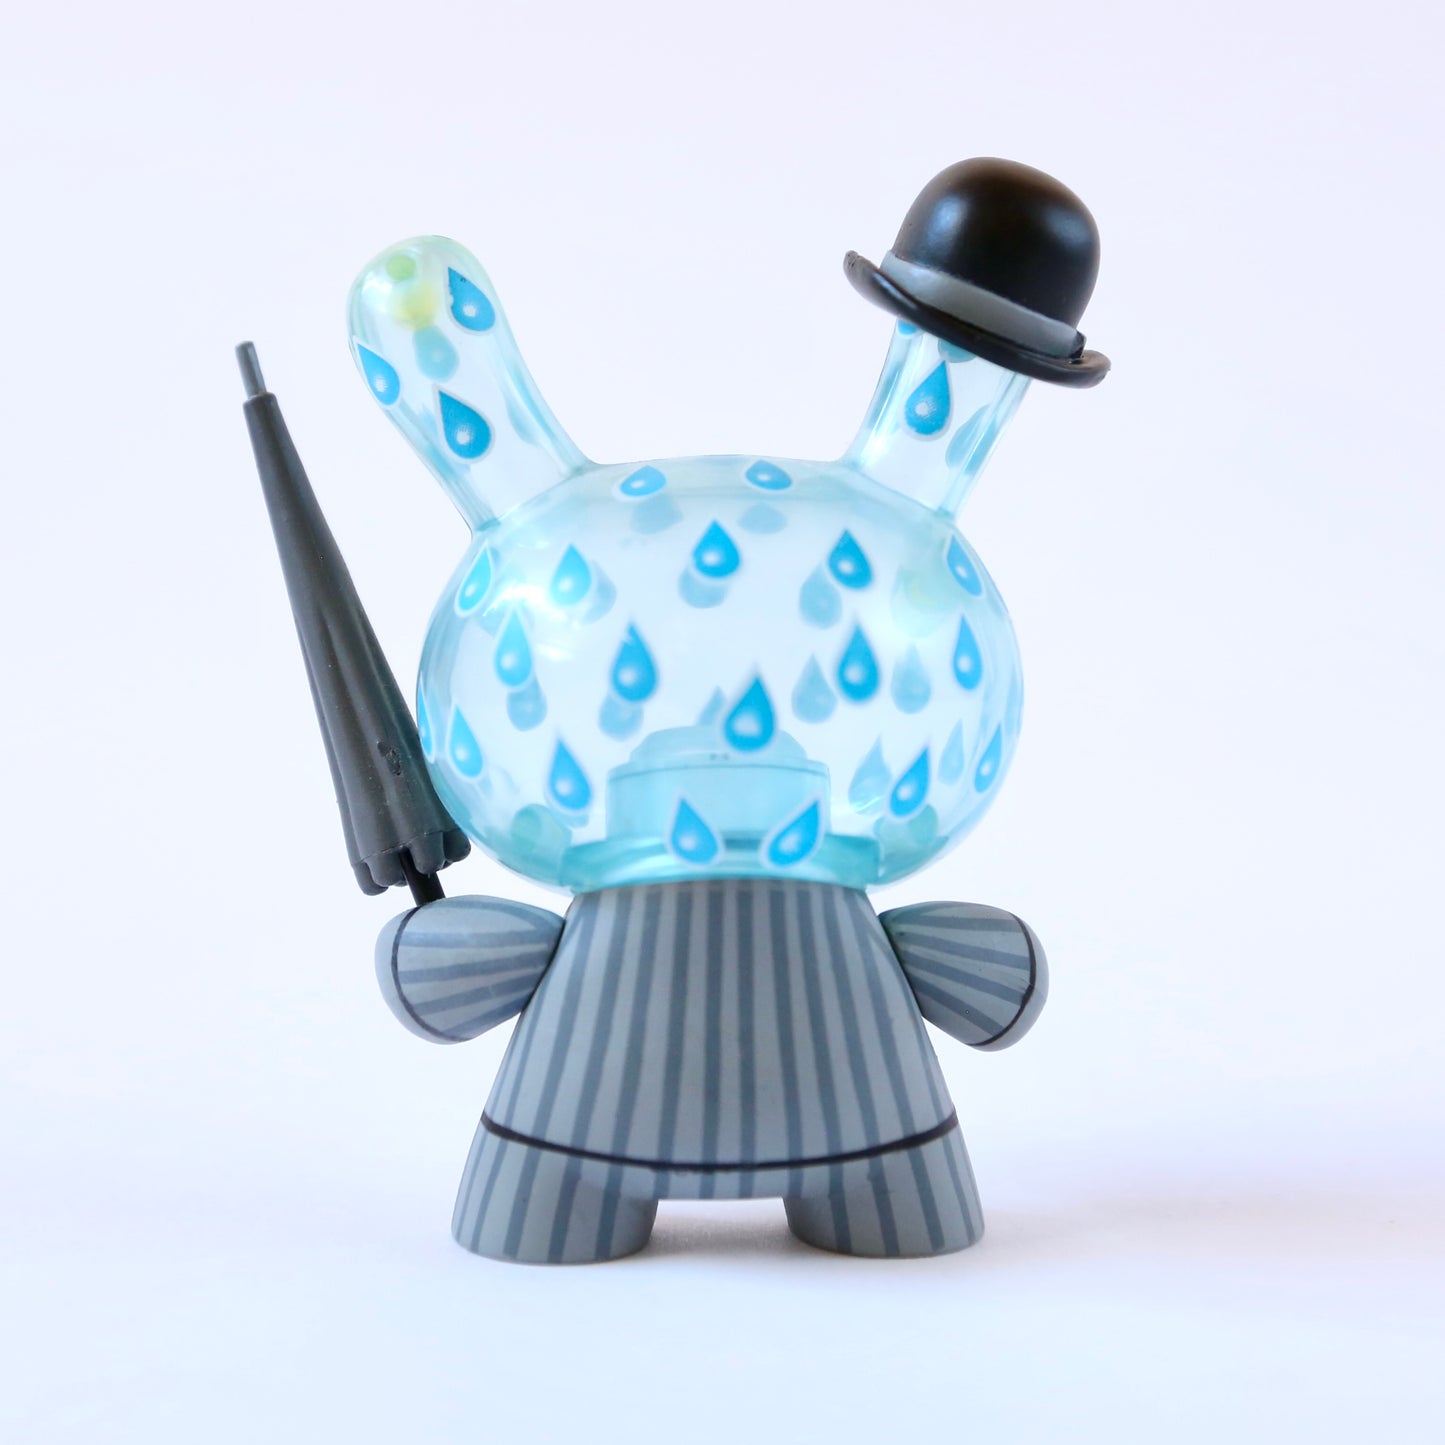 "Rainy London" (3/25) 3in Dunny by Triclops x Kidrobot